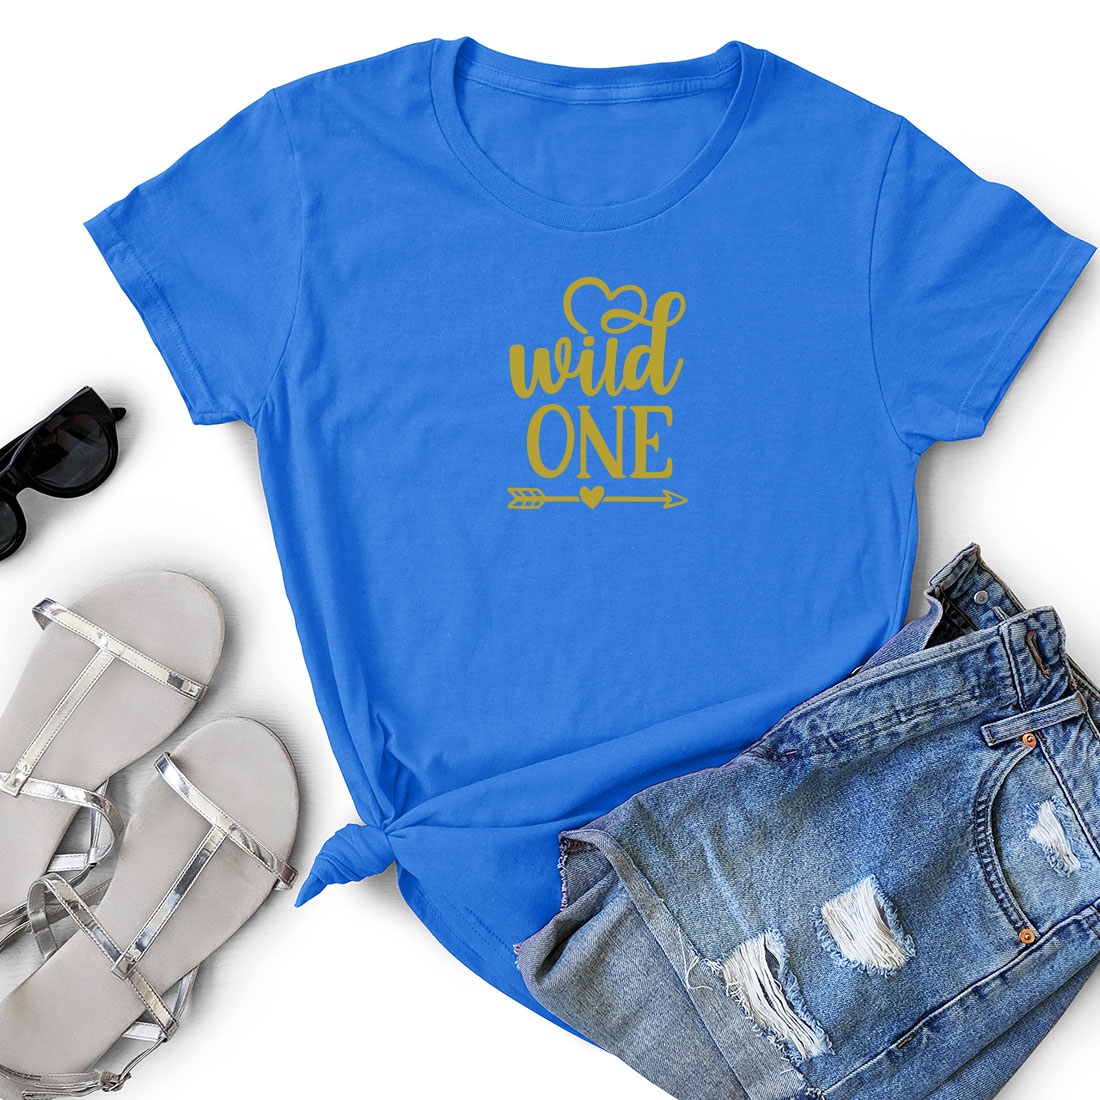 T - shirt that says get wild one next to a pair of shorts.